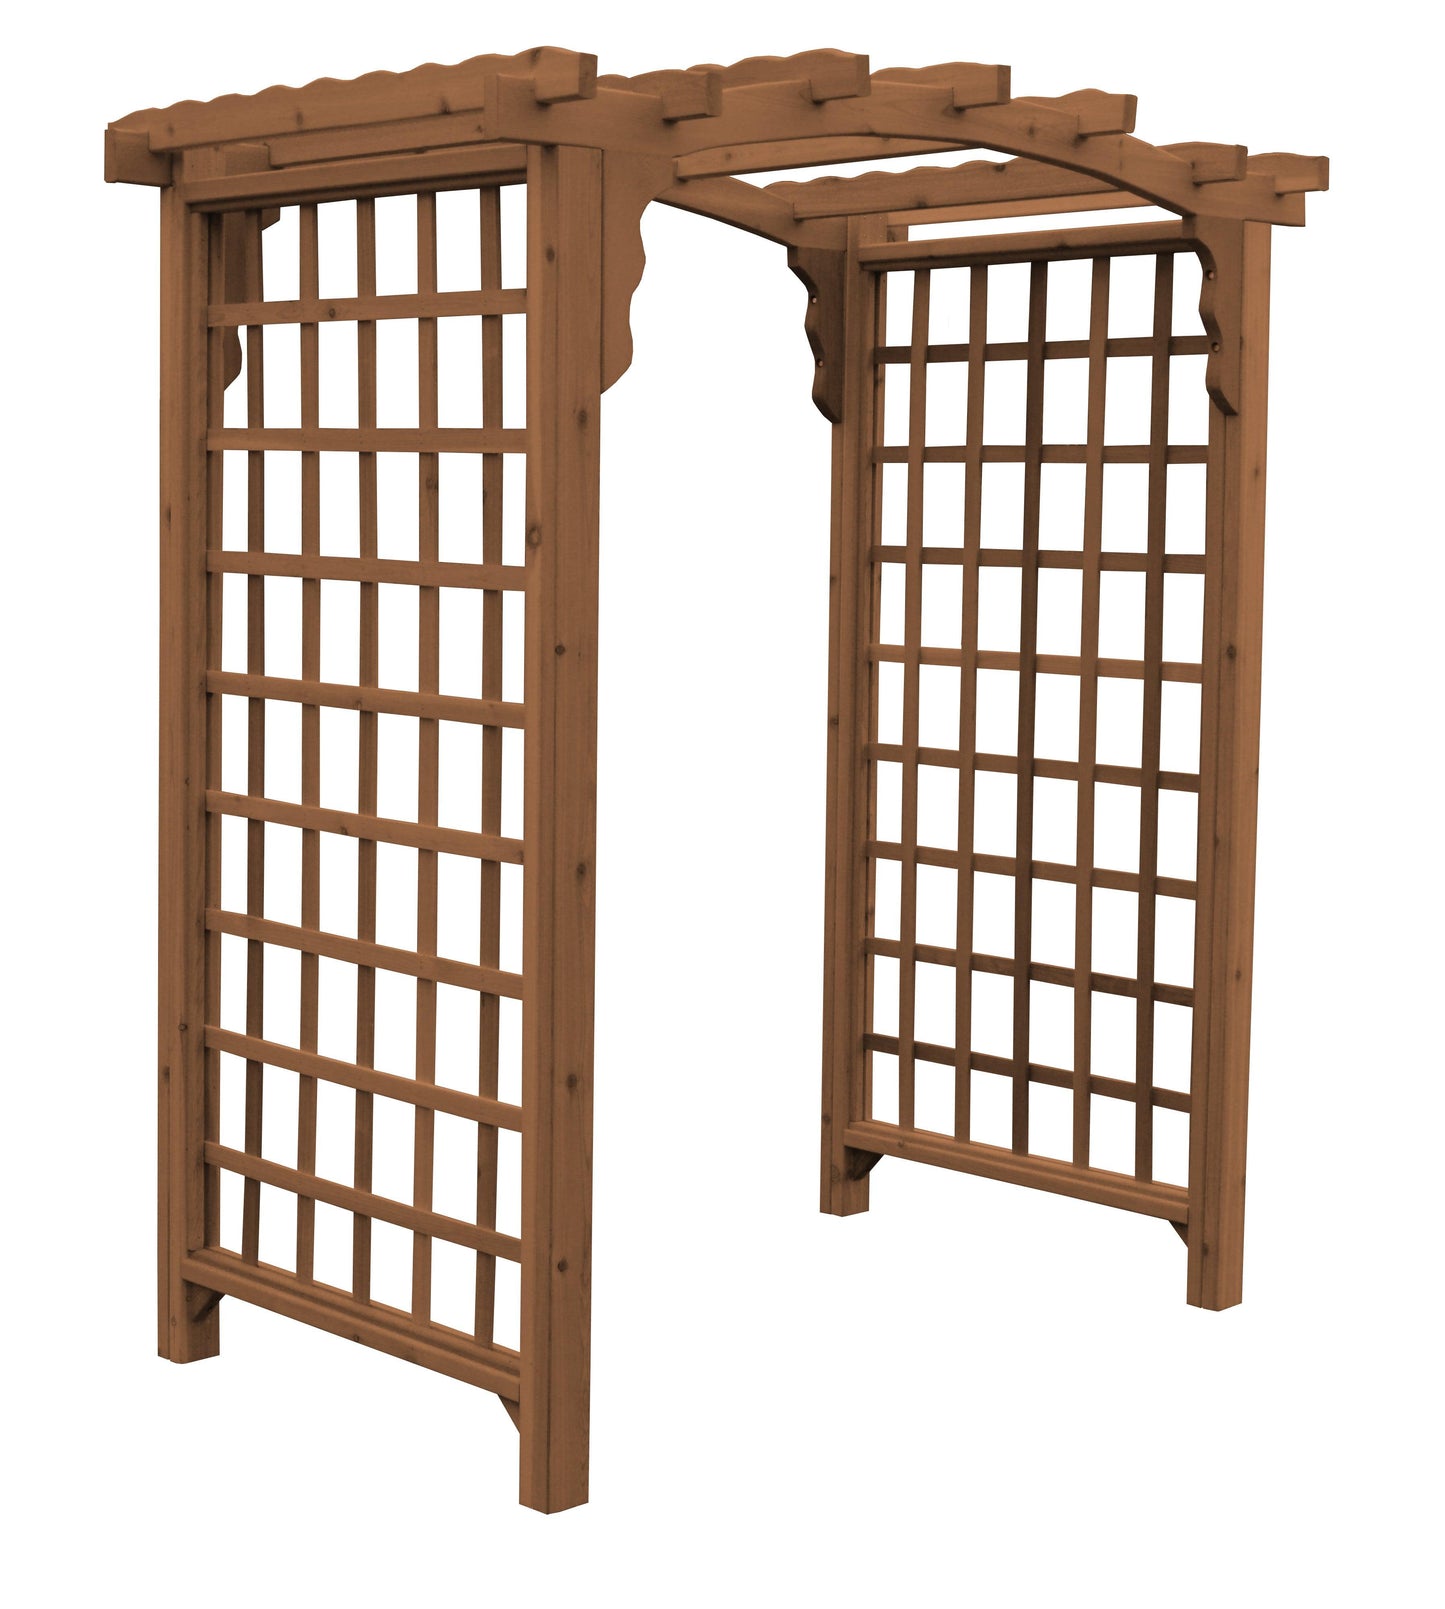 A&L Furniture Co. Western Red Cedar 6' Cambridge Arbor - LEAD TIME TO SHIP 4 WEEKS OR LESS